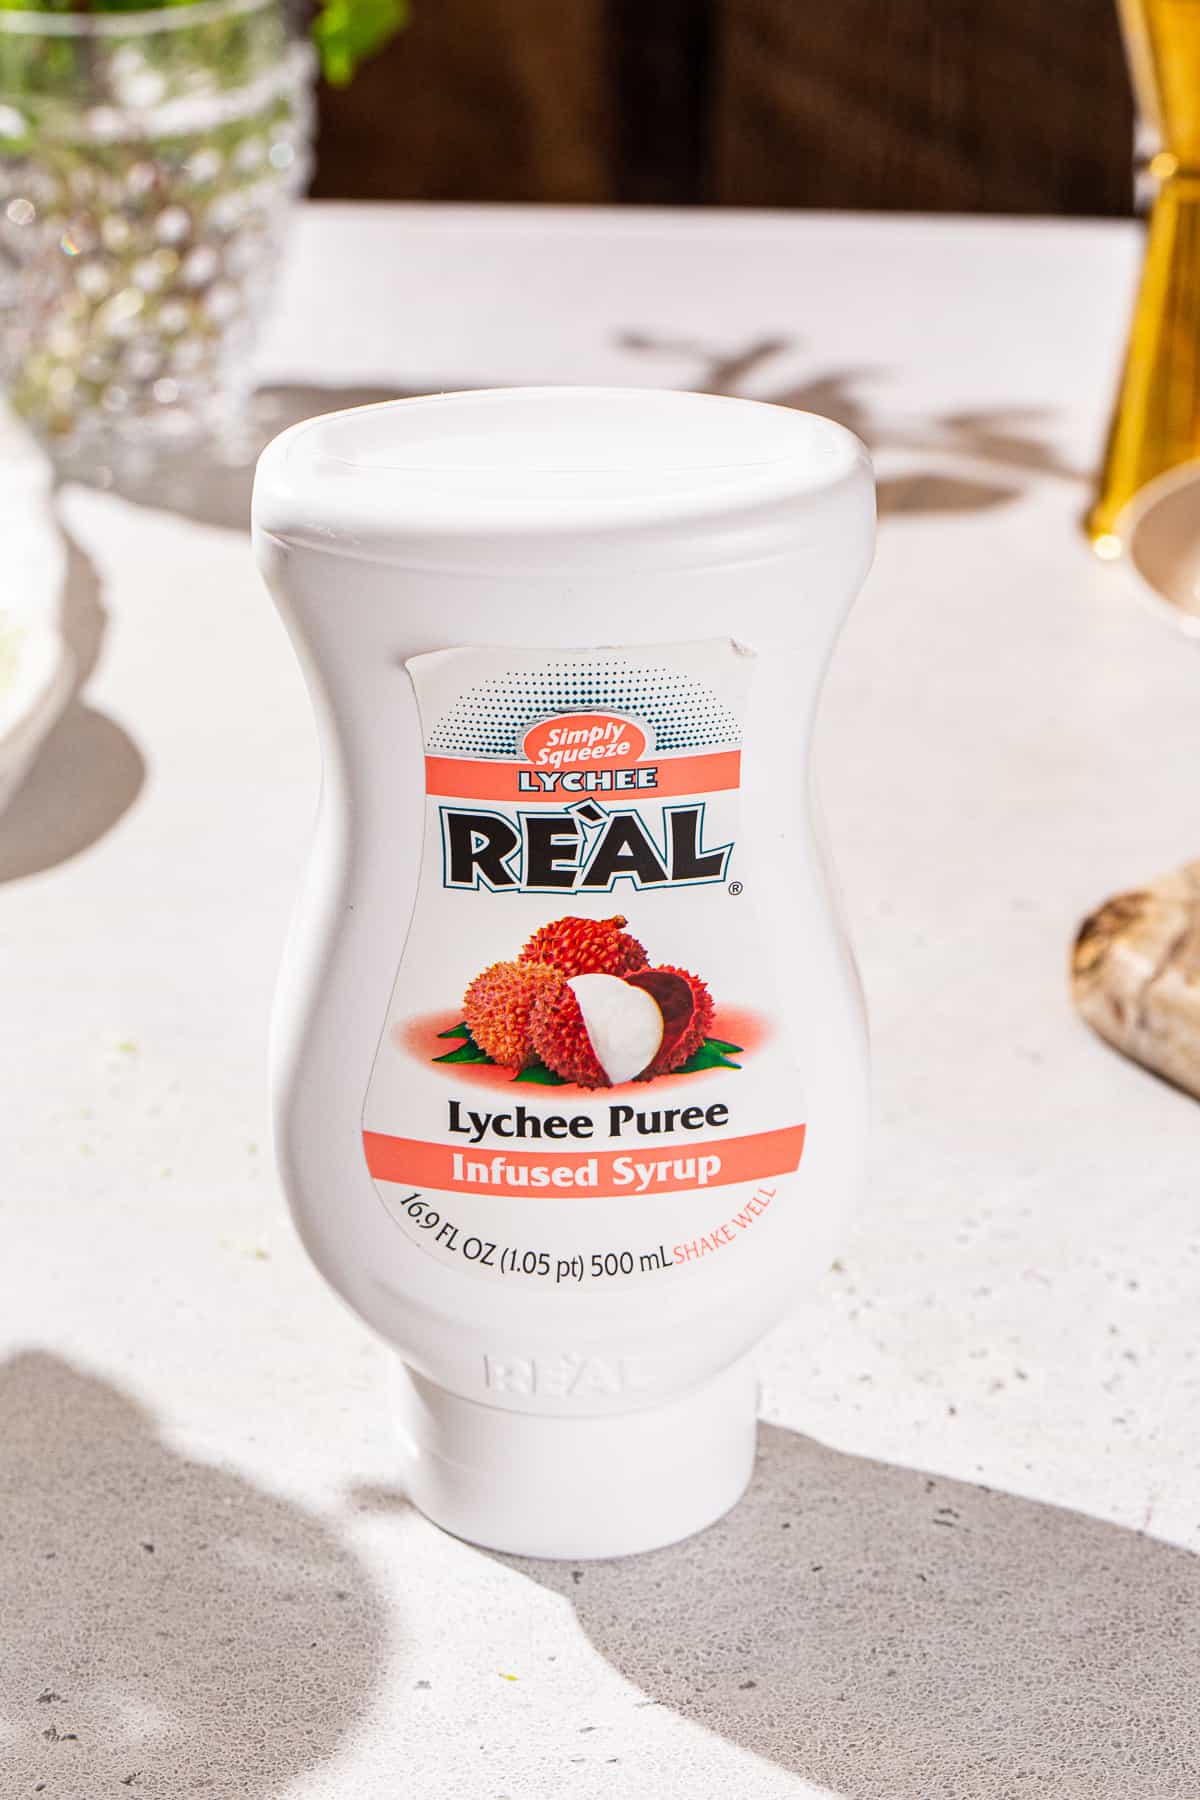 Lychee Puree on a countertop. It is in a white squeeze bottle and it is made by Real brand.